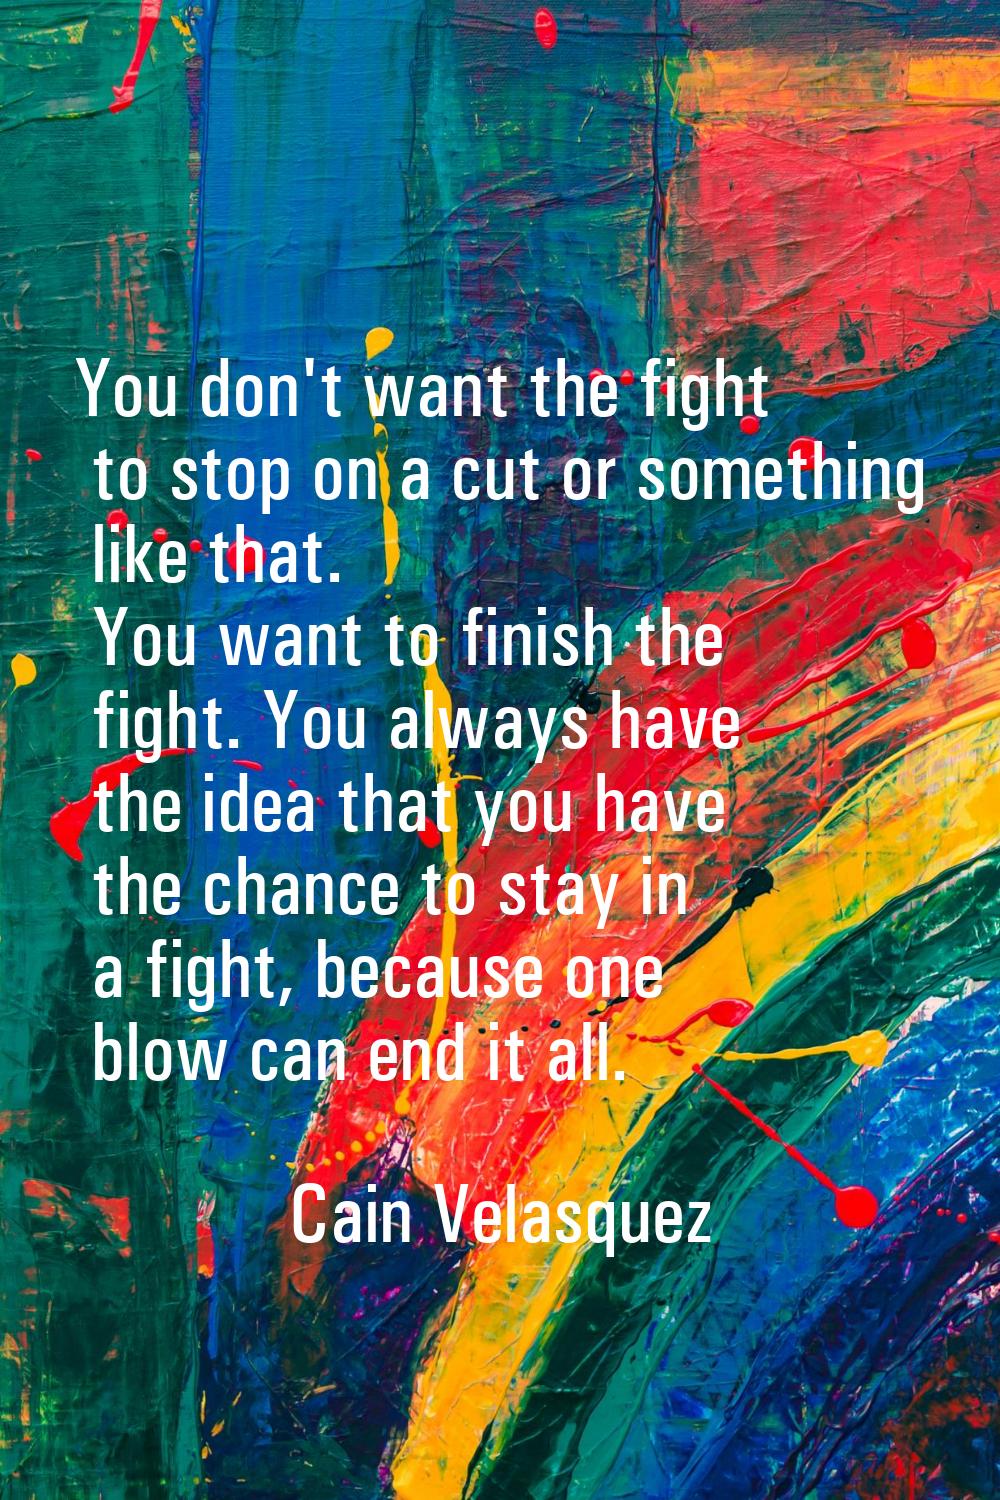 You don't want the fight to stop on a cut or something like that. You want to finish the fight. You